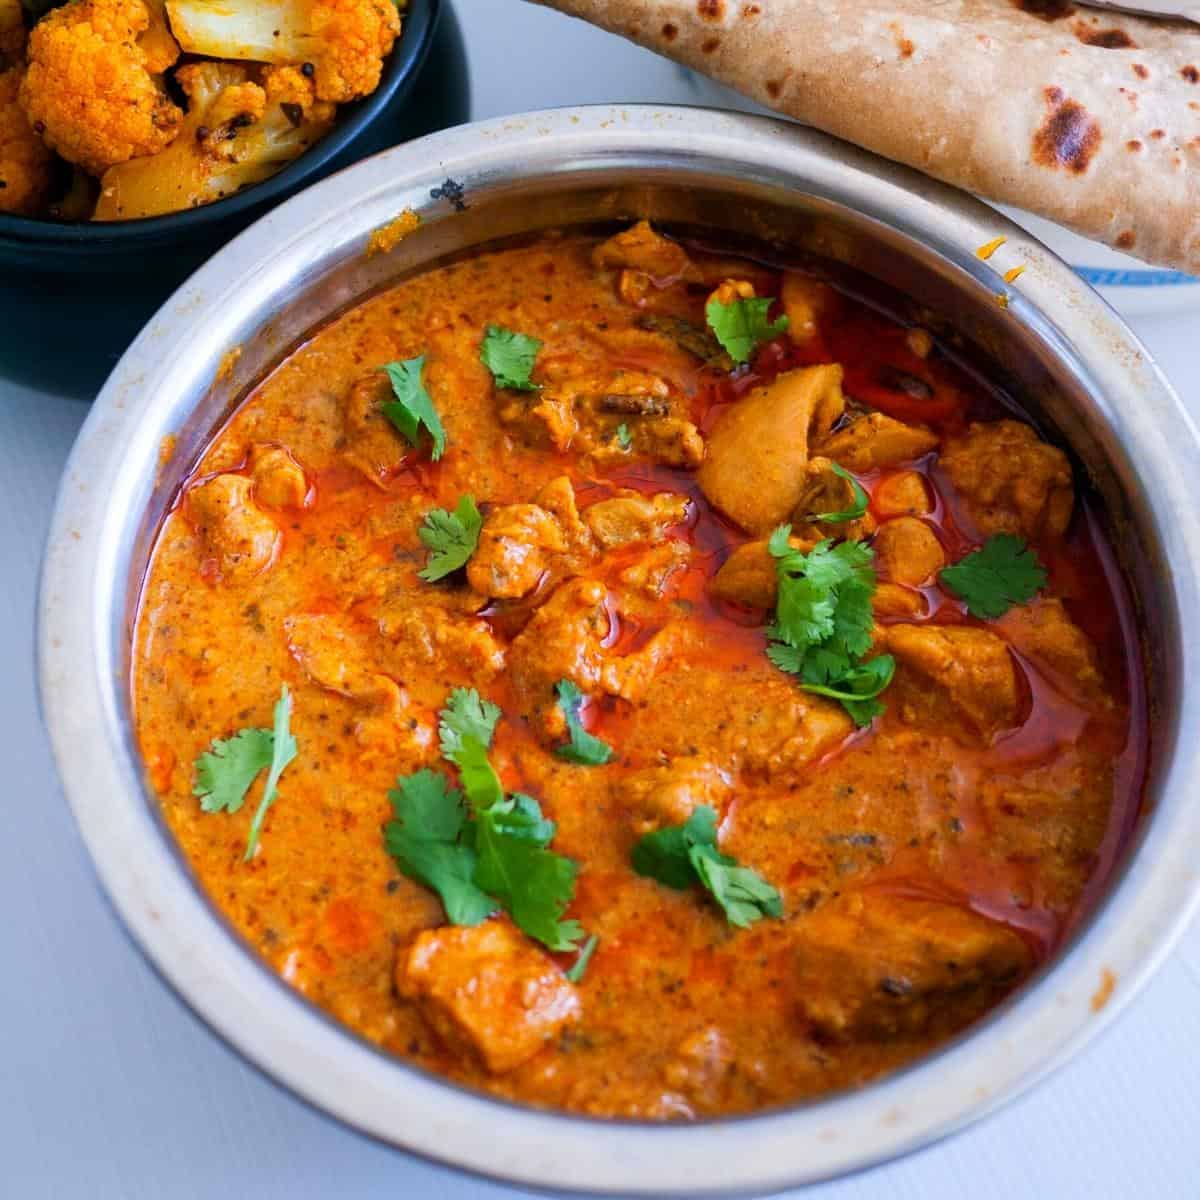 Discover Delicious and Easy Spicy Indian Recipes!